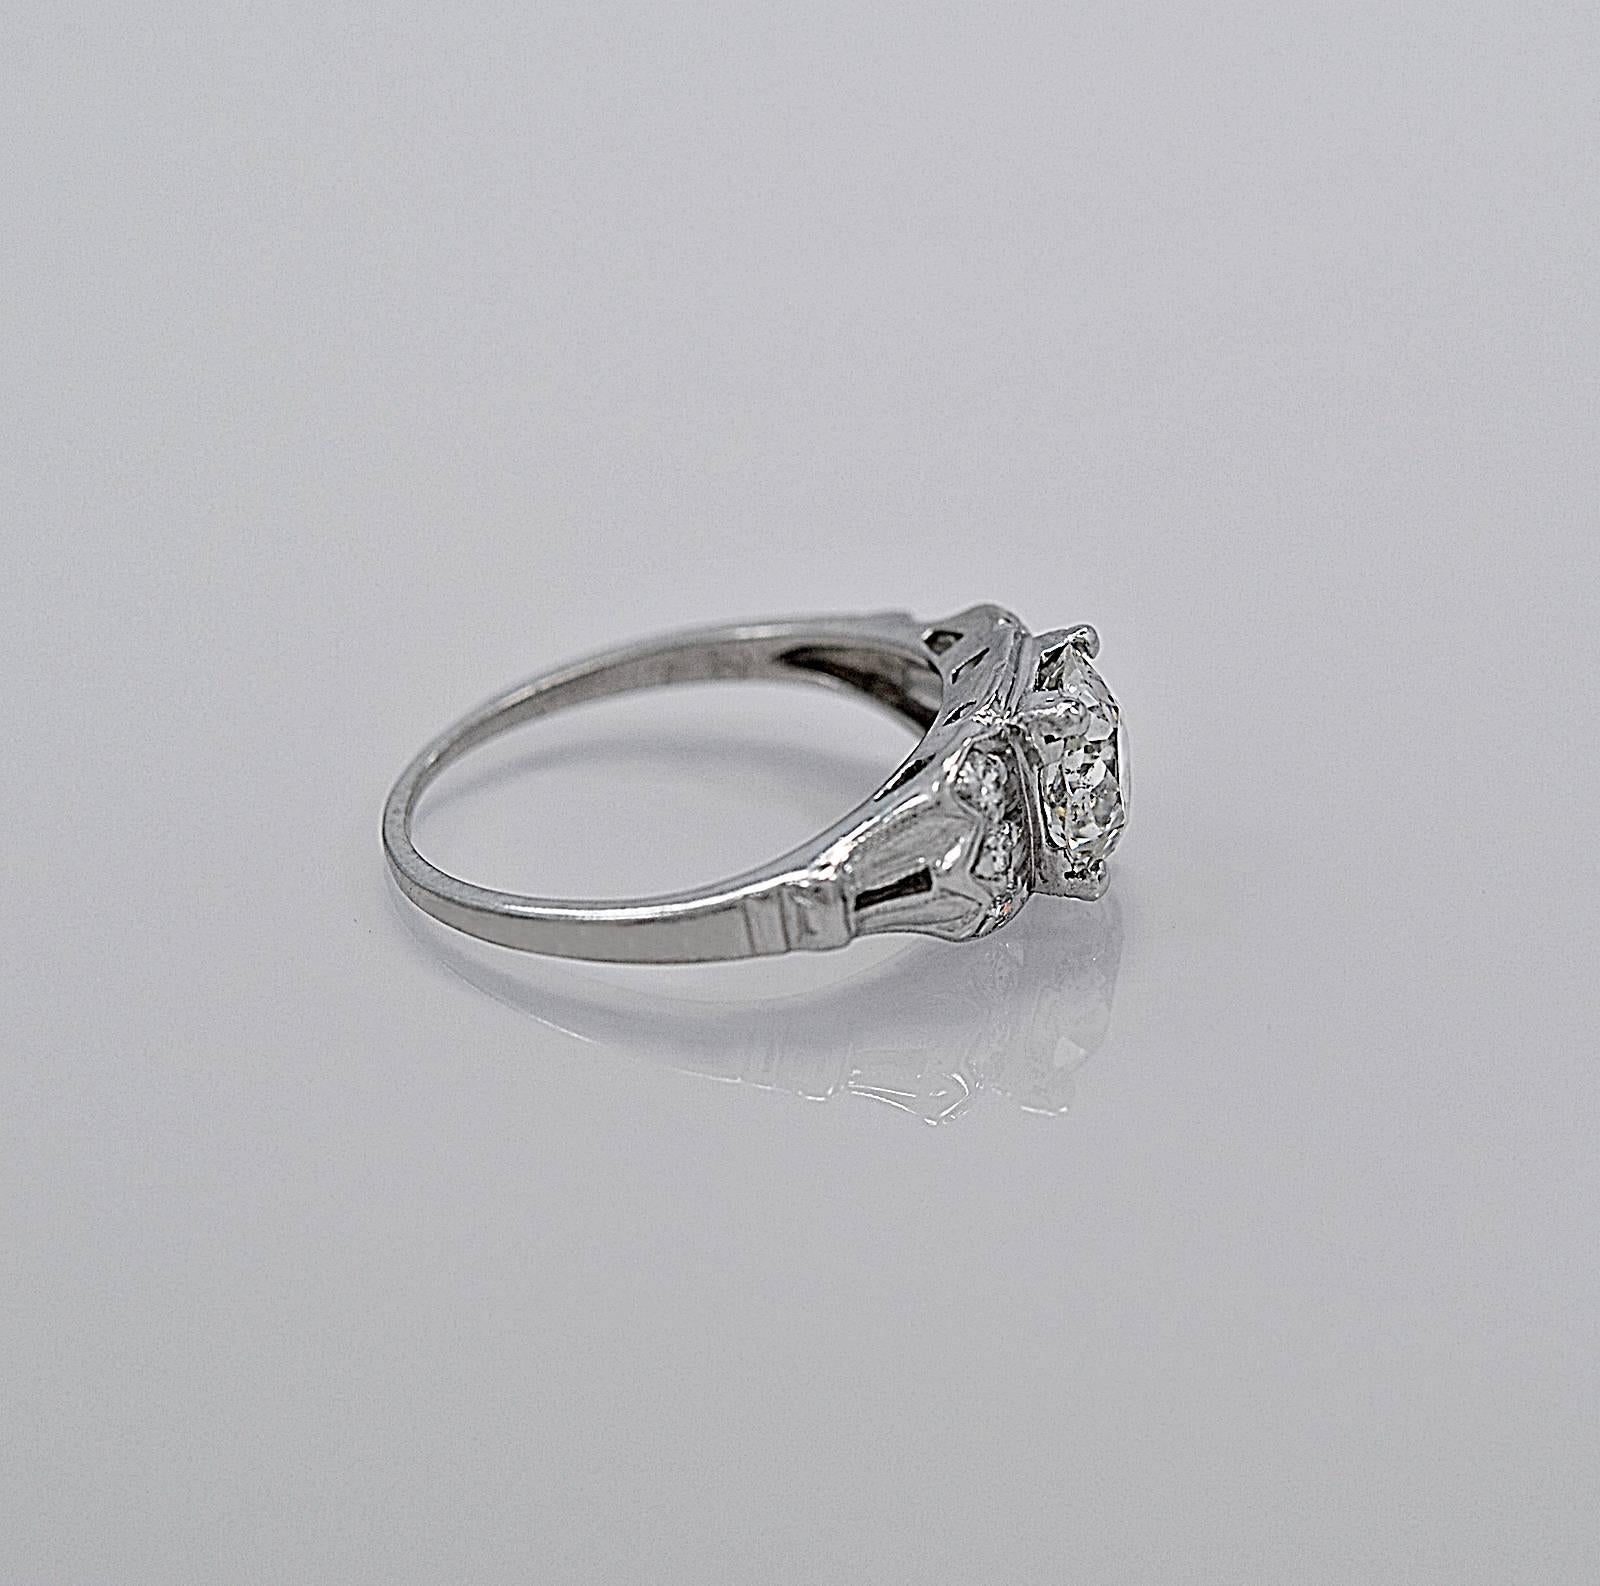 A wonderful antique engagement ring with beautiful diamond set 